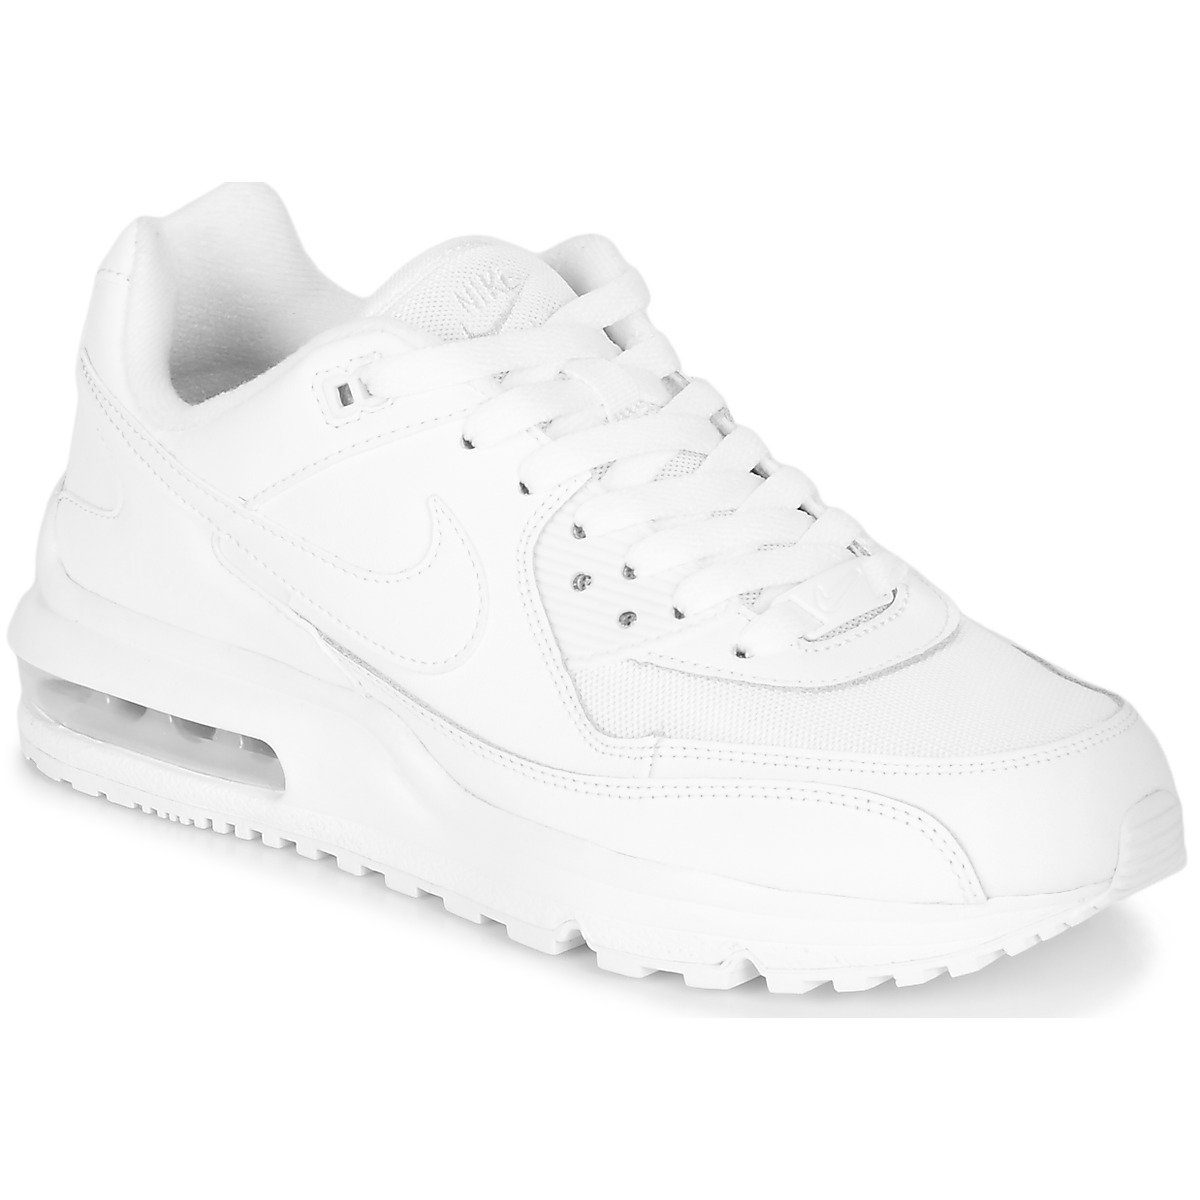 Nike effects AIR MAX WRIGHT GS 16774369 1200 A